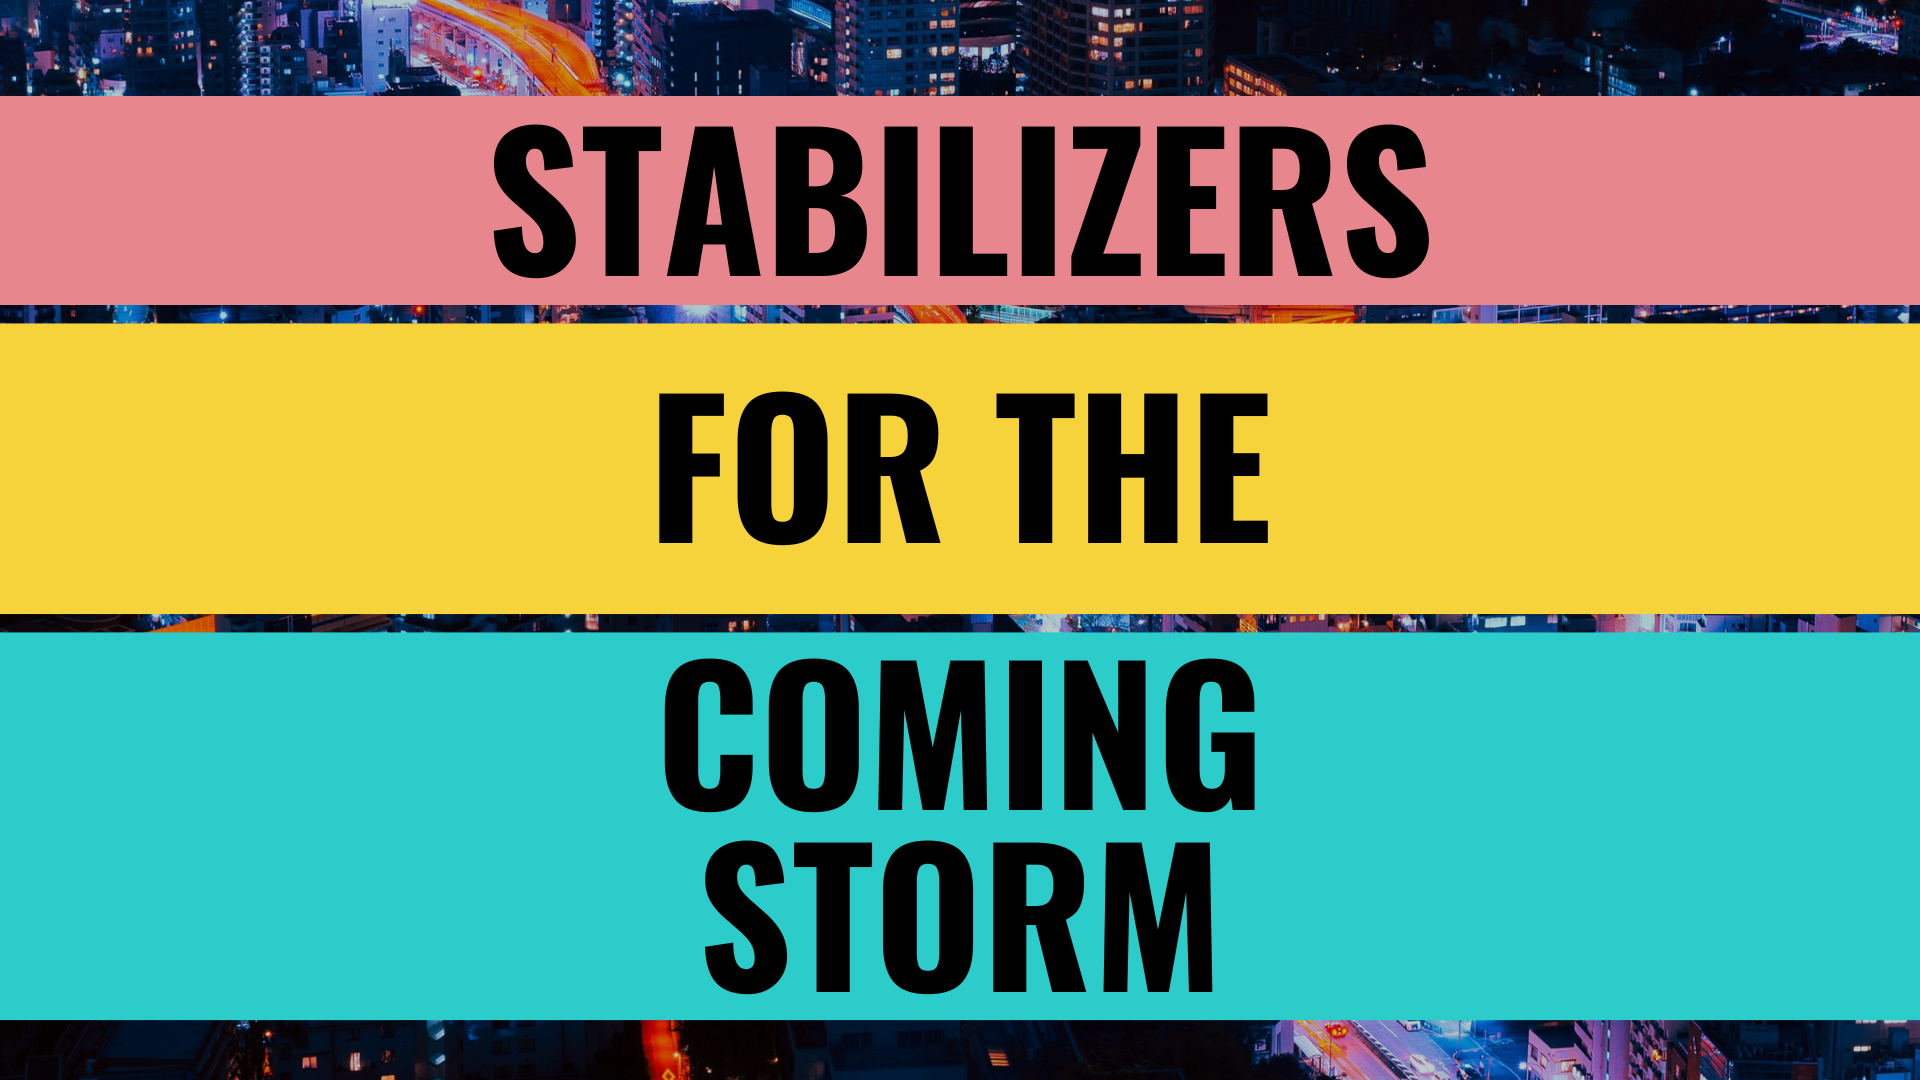 Stabilizers for the Coming Storm